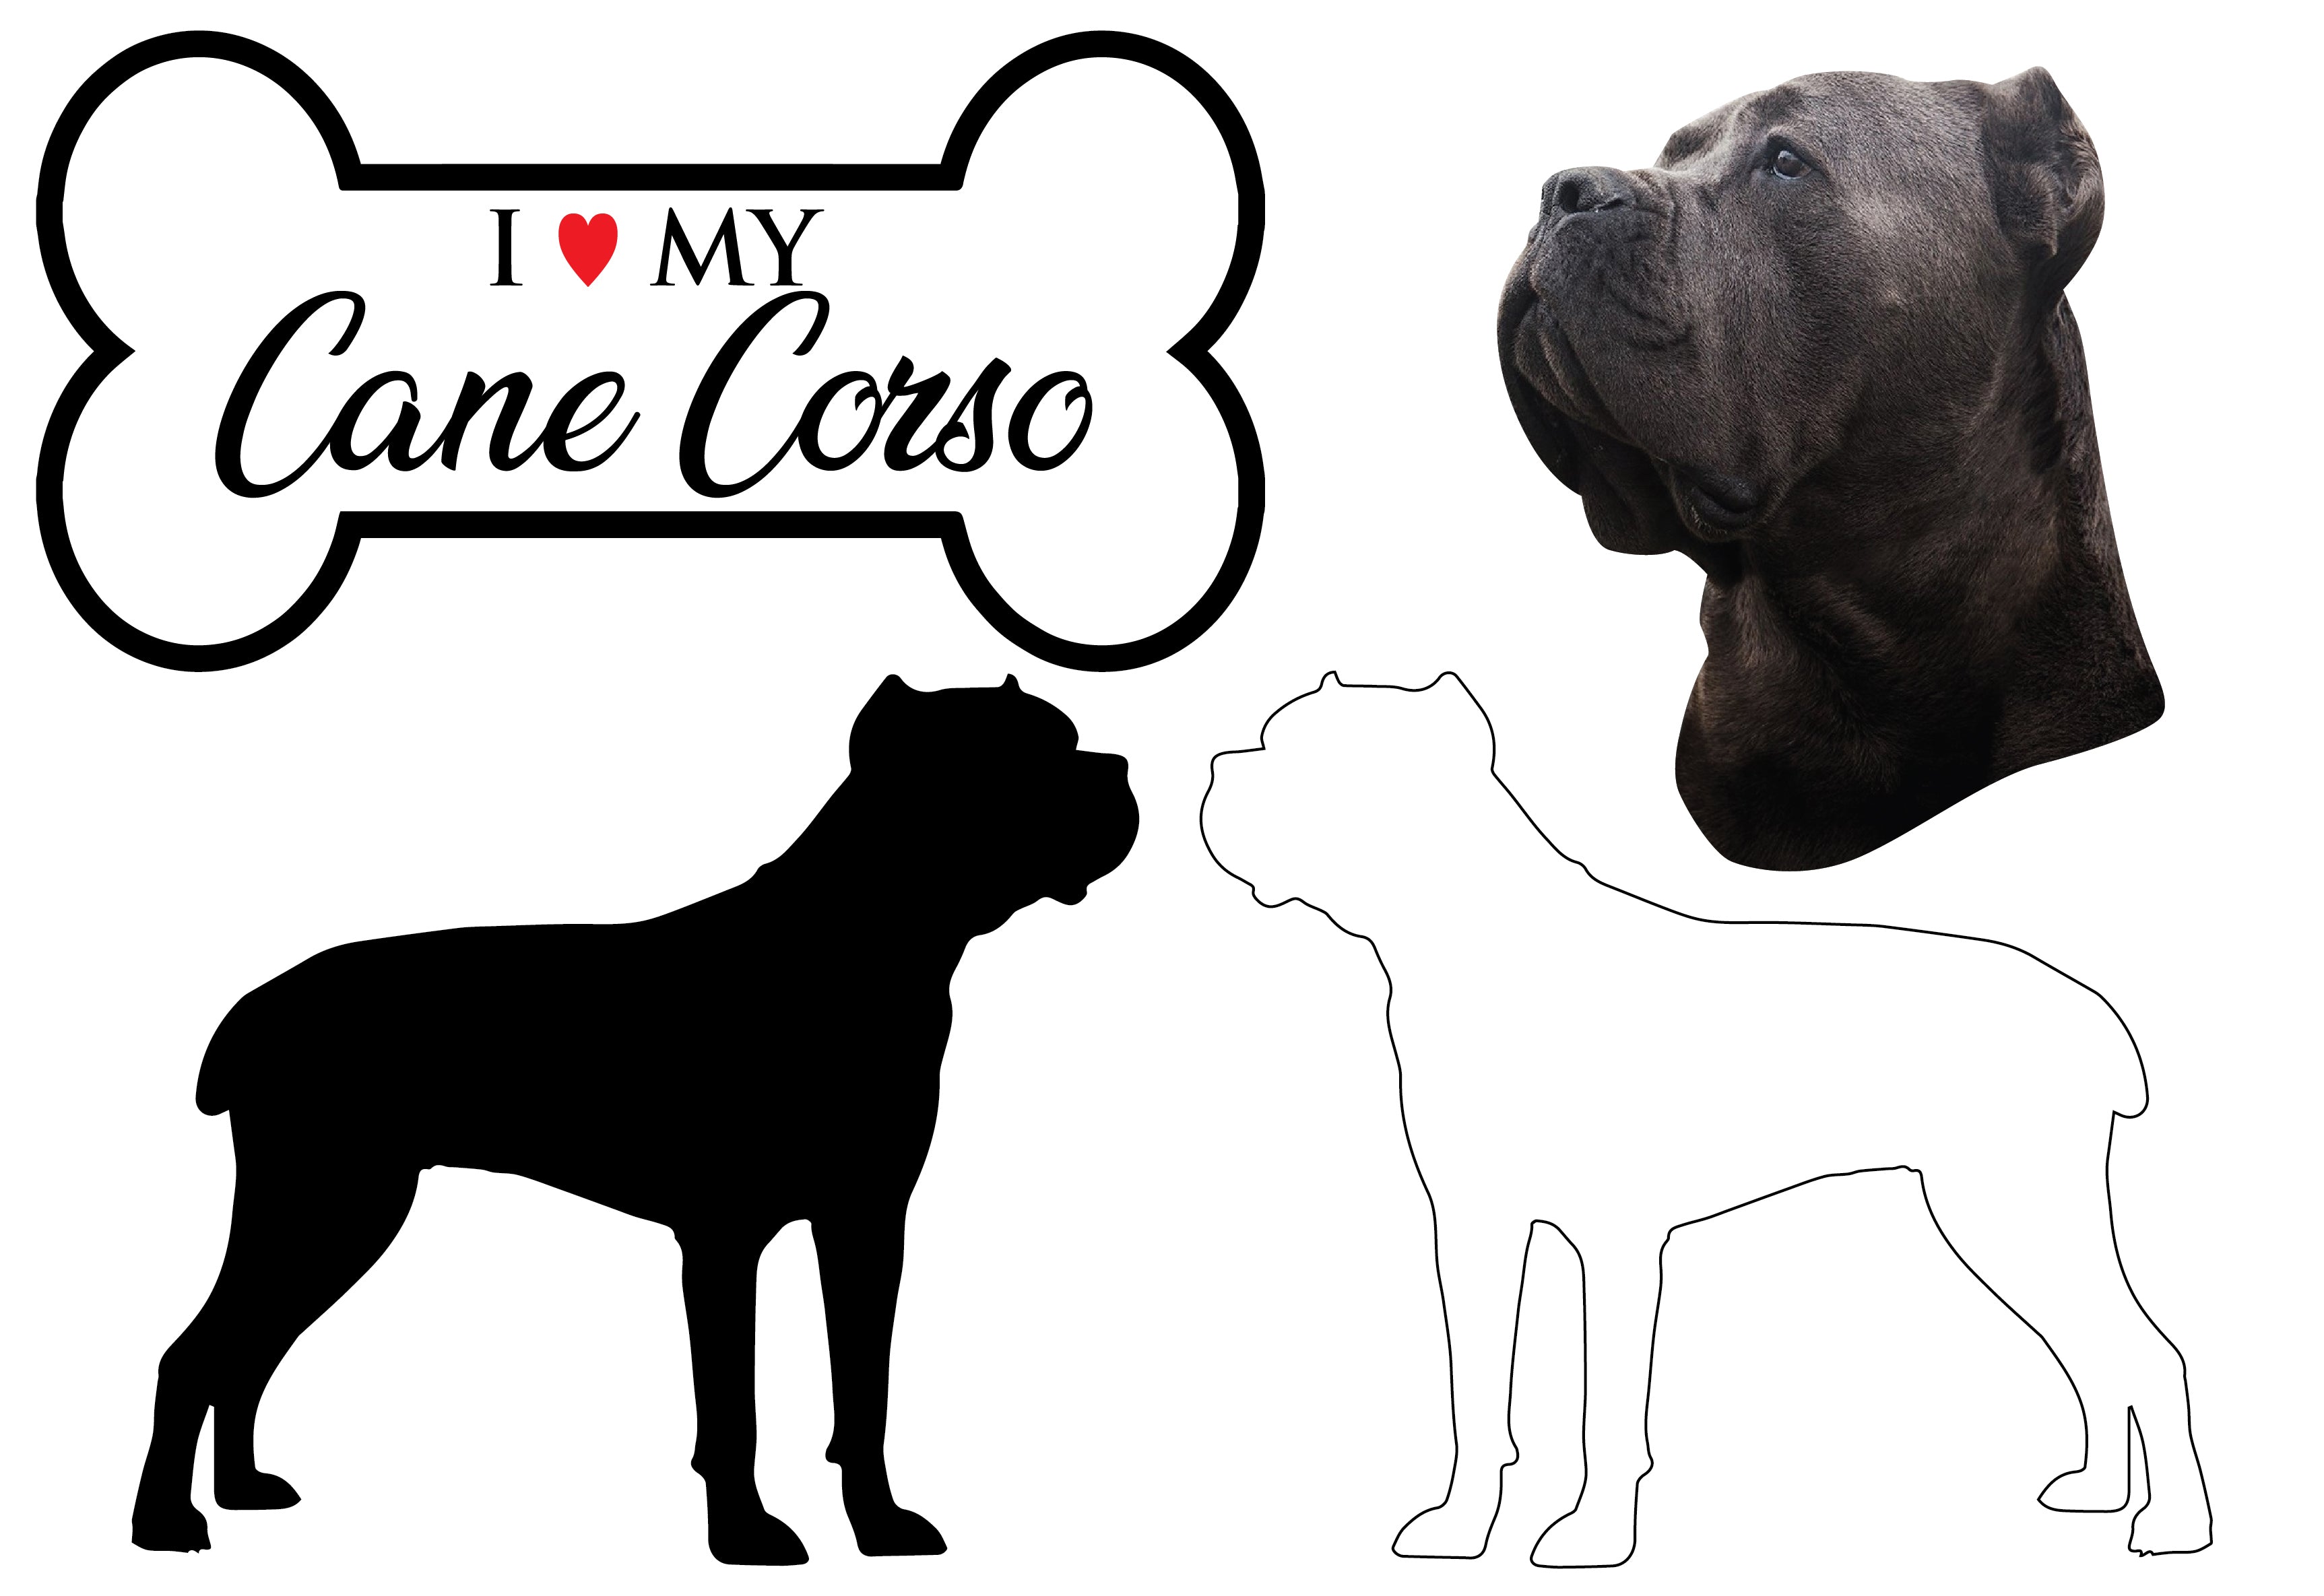 Cane Corso - Dog Breed Decals (Set of 16) - Sizes in Description